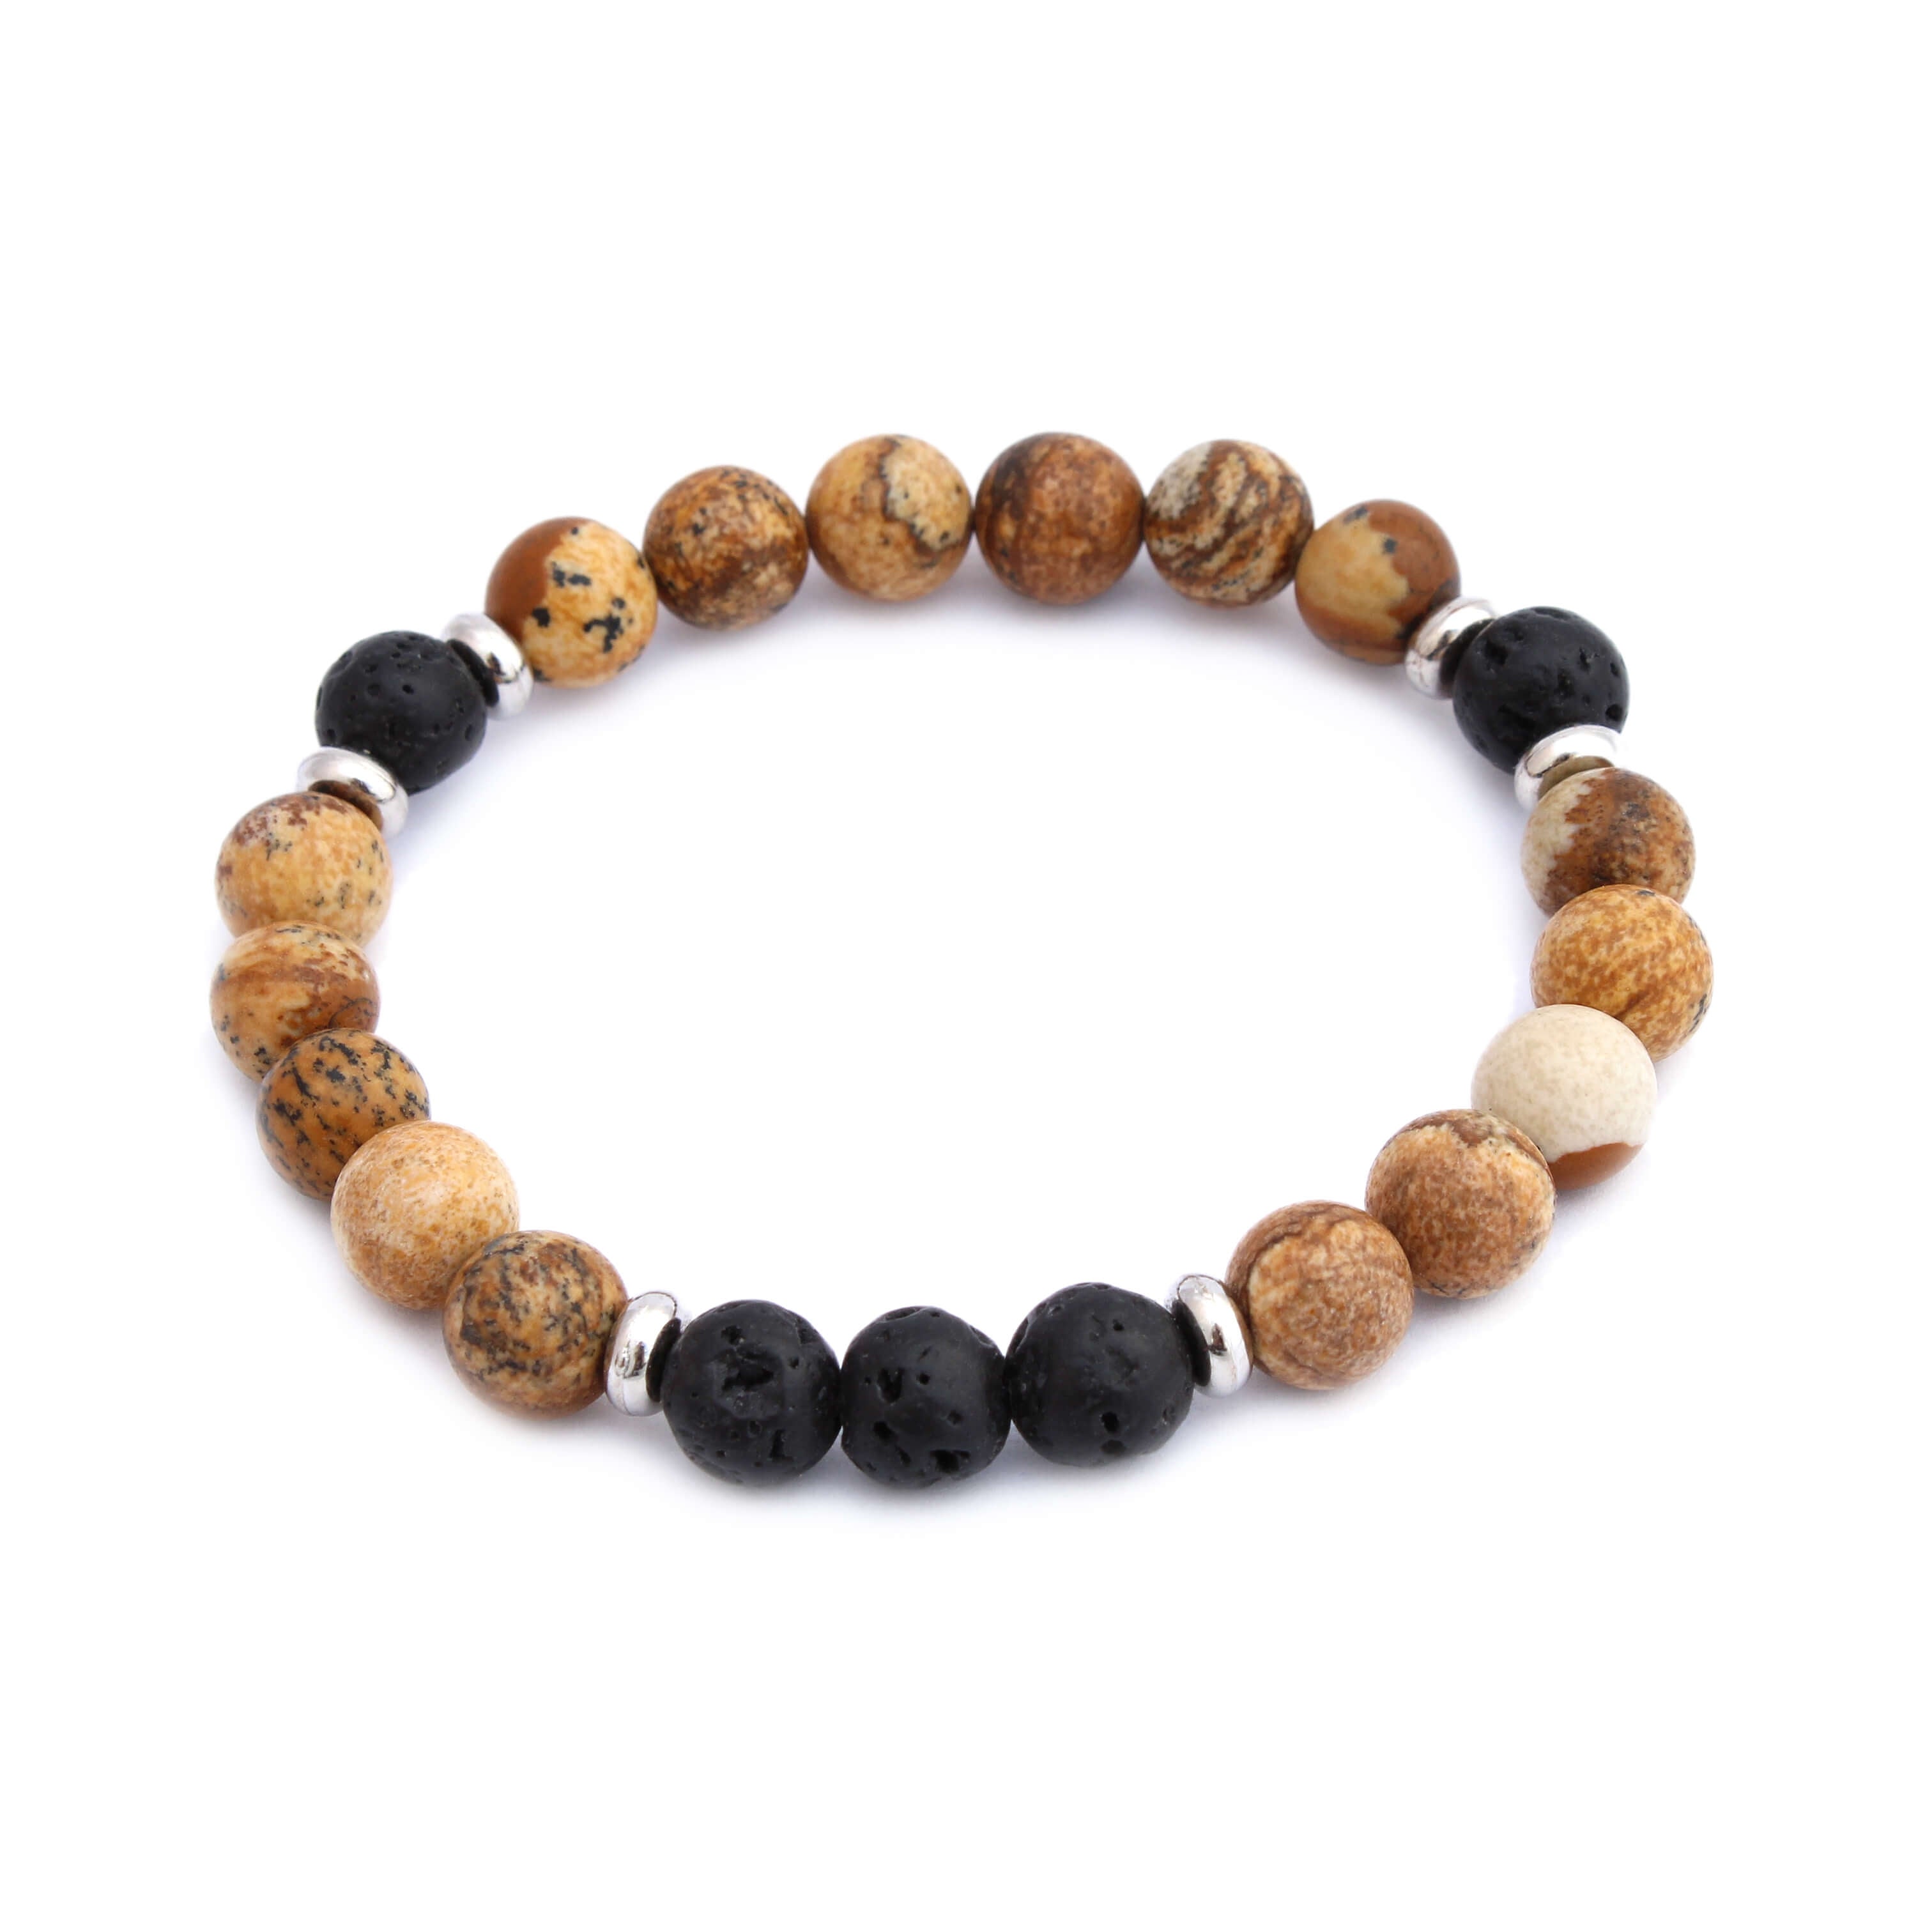 Buy ORIGINAL RED JASPER BRACELET FOR BALANCE, ENDURANCE AND EMOTIONAL  WELLBEING Online on Brown Living | Womens Accessories